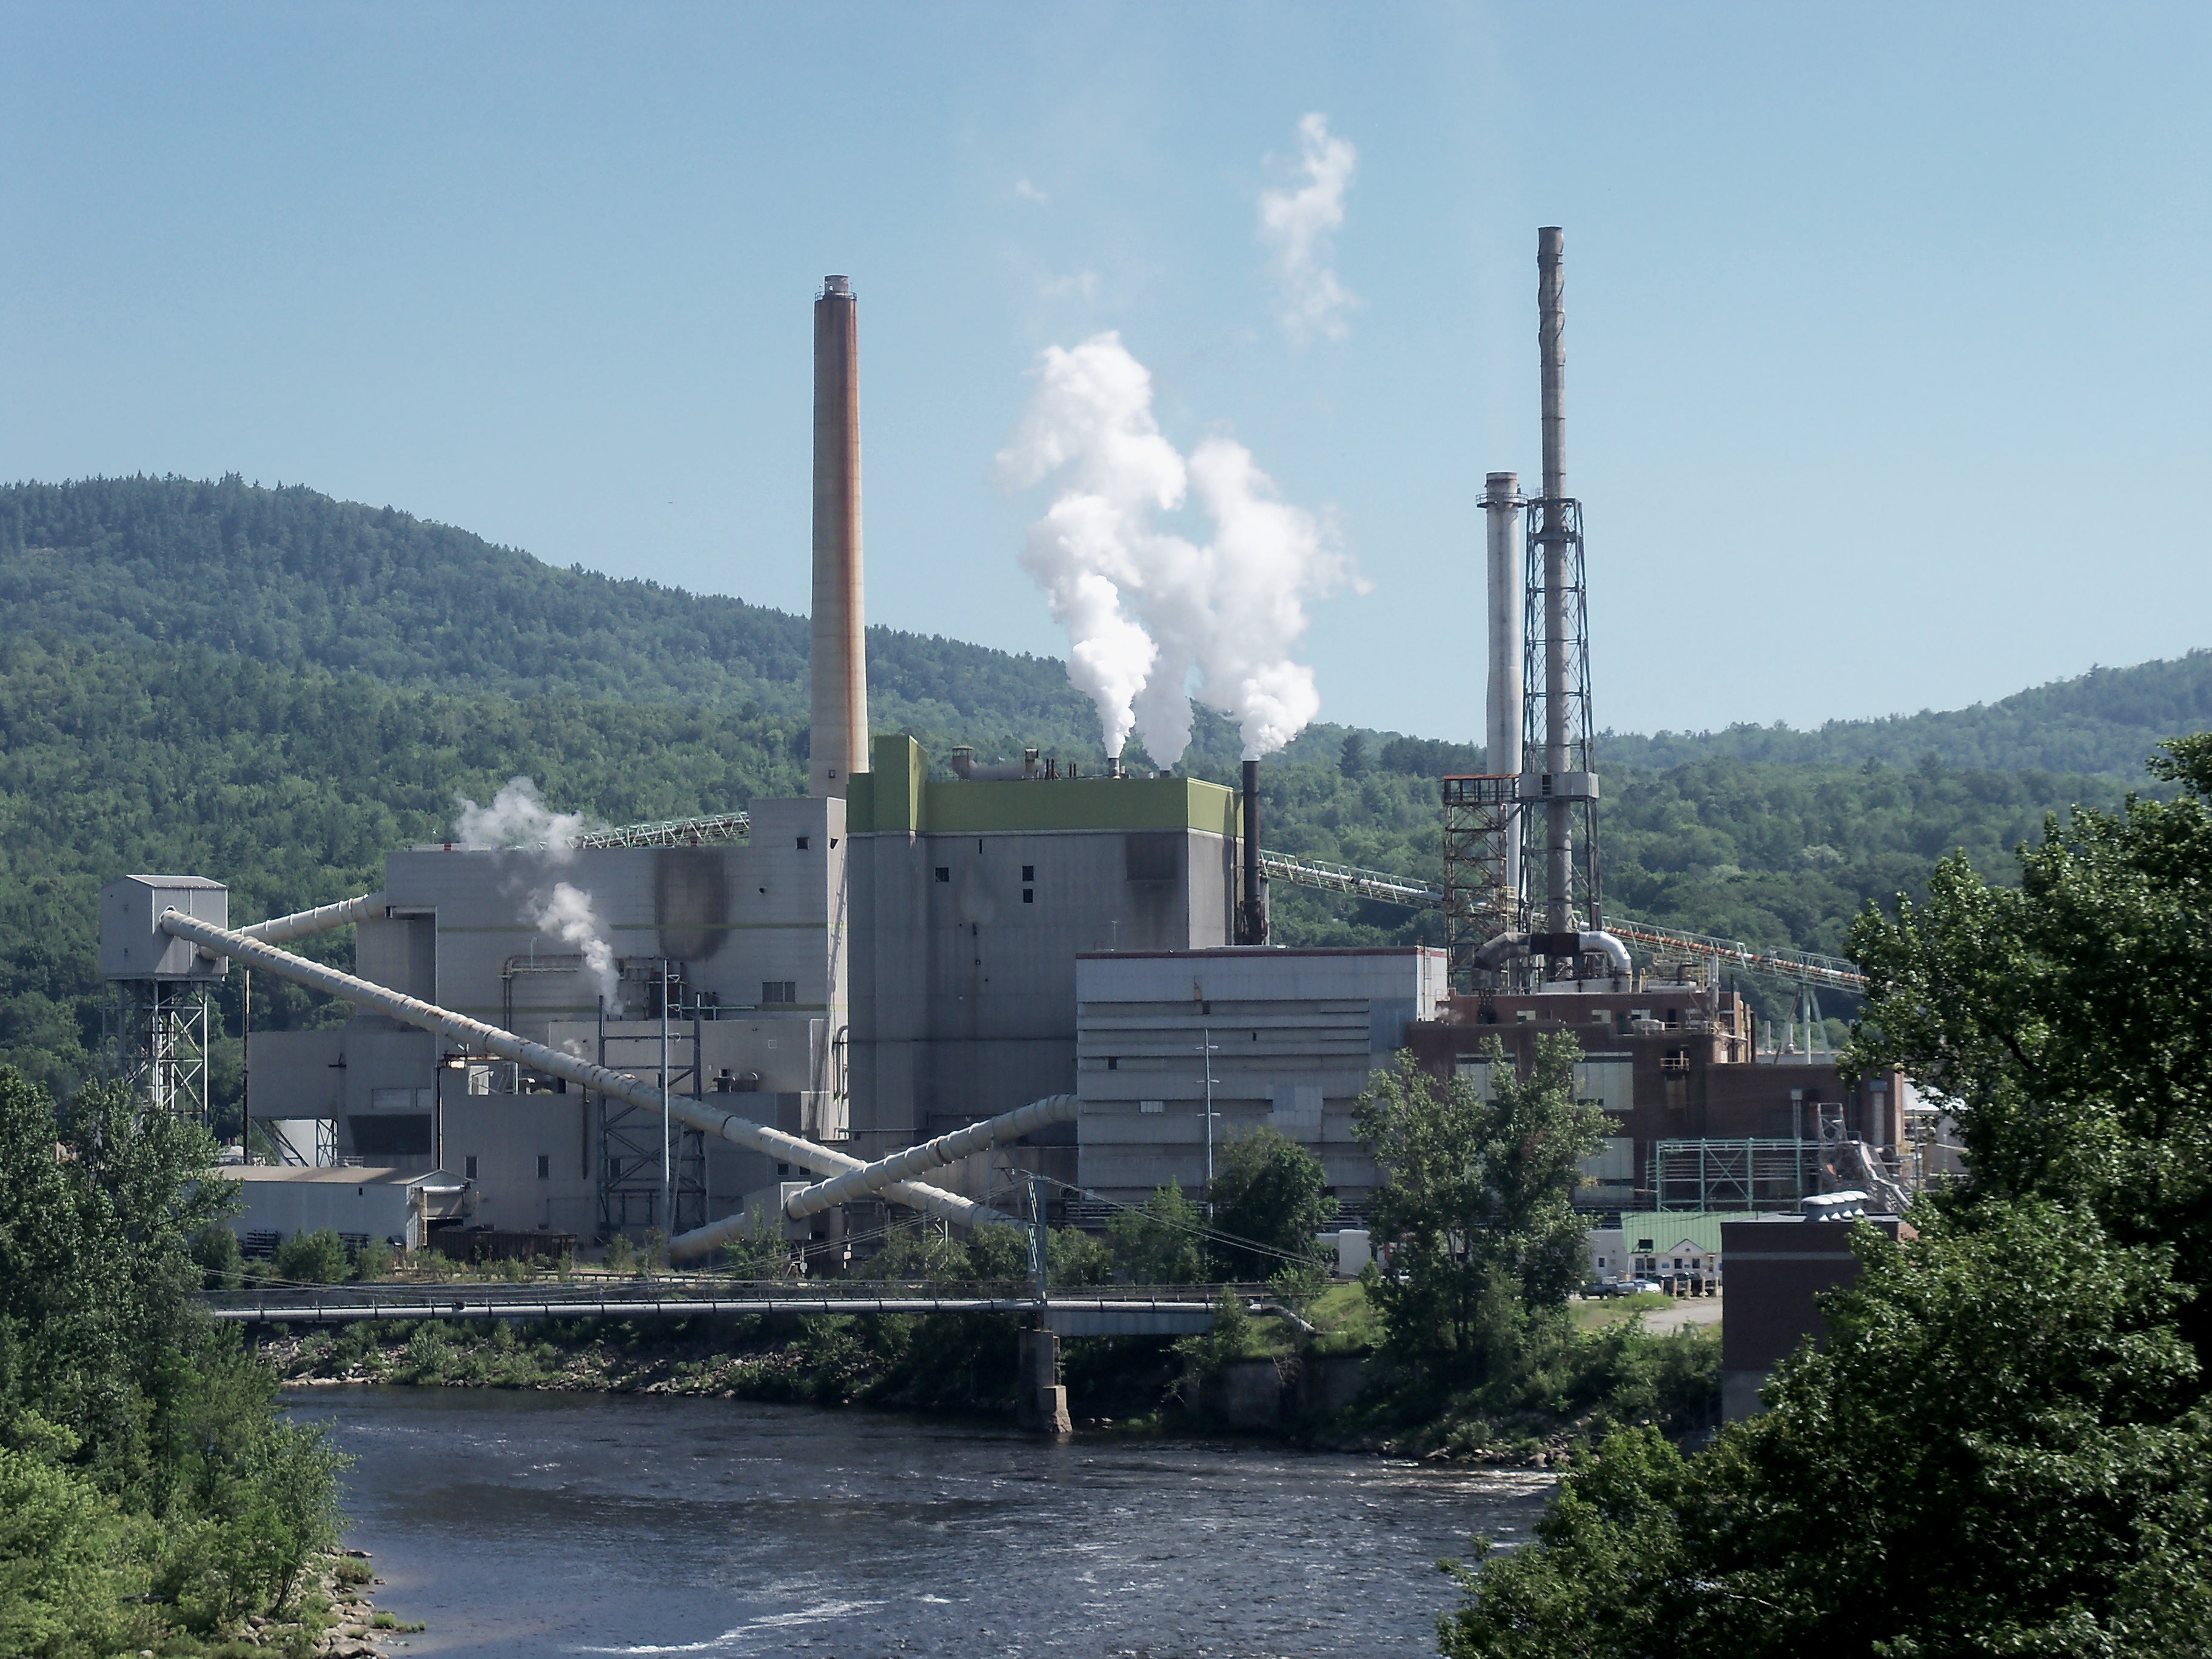 View of the Rumford Maine paper mill.